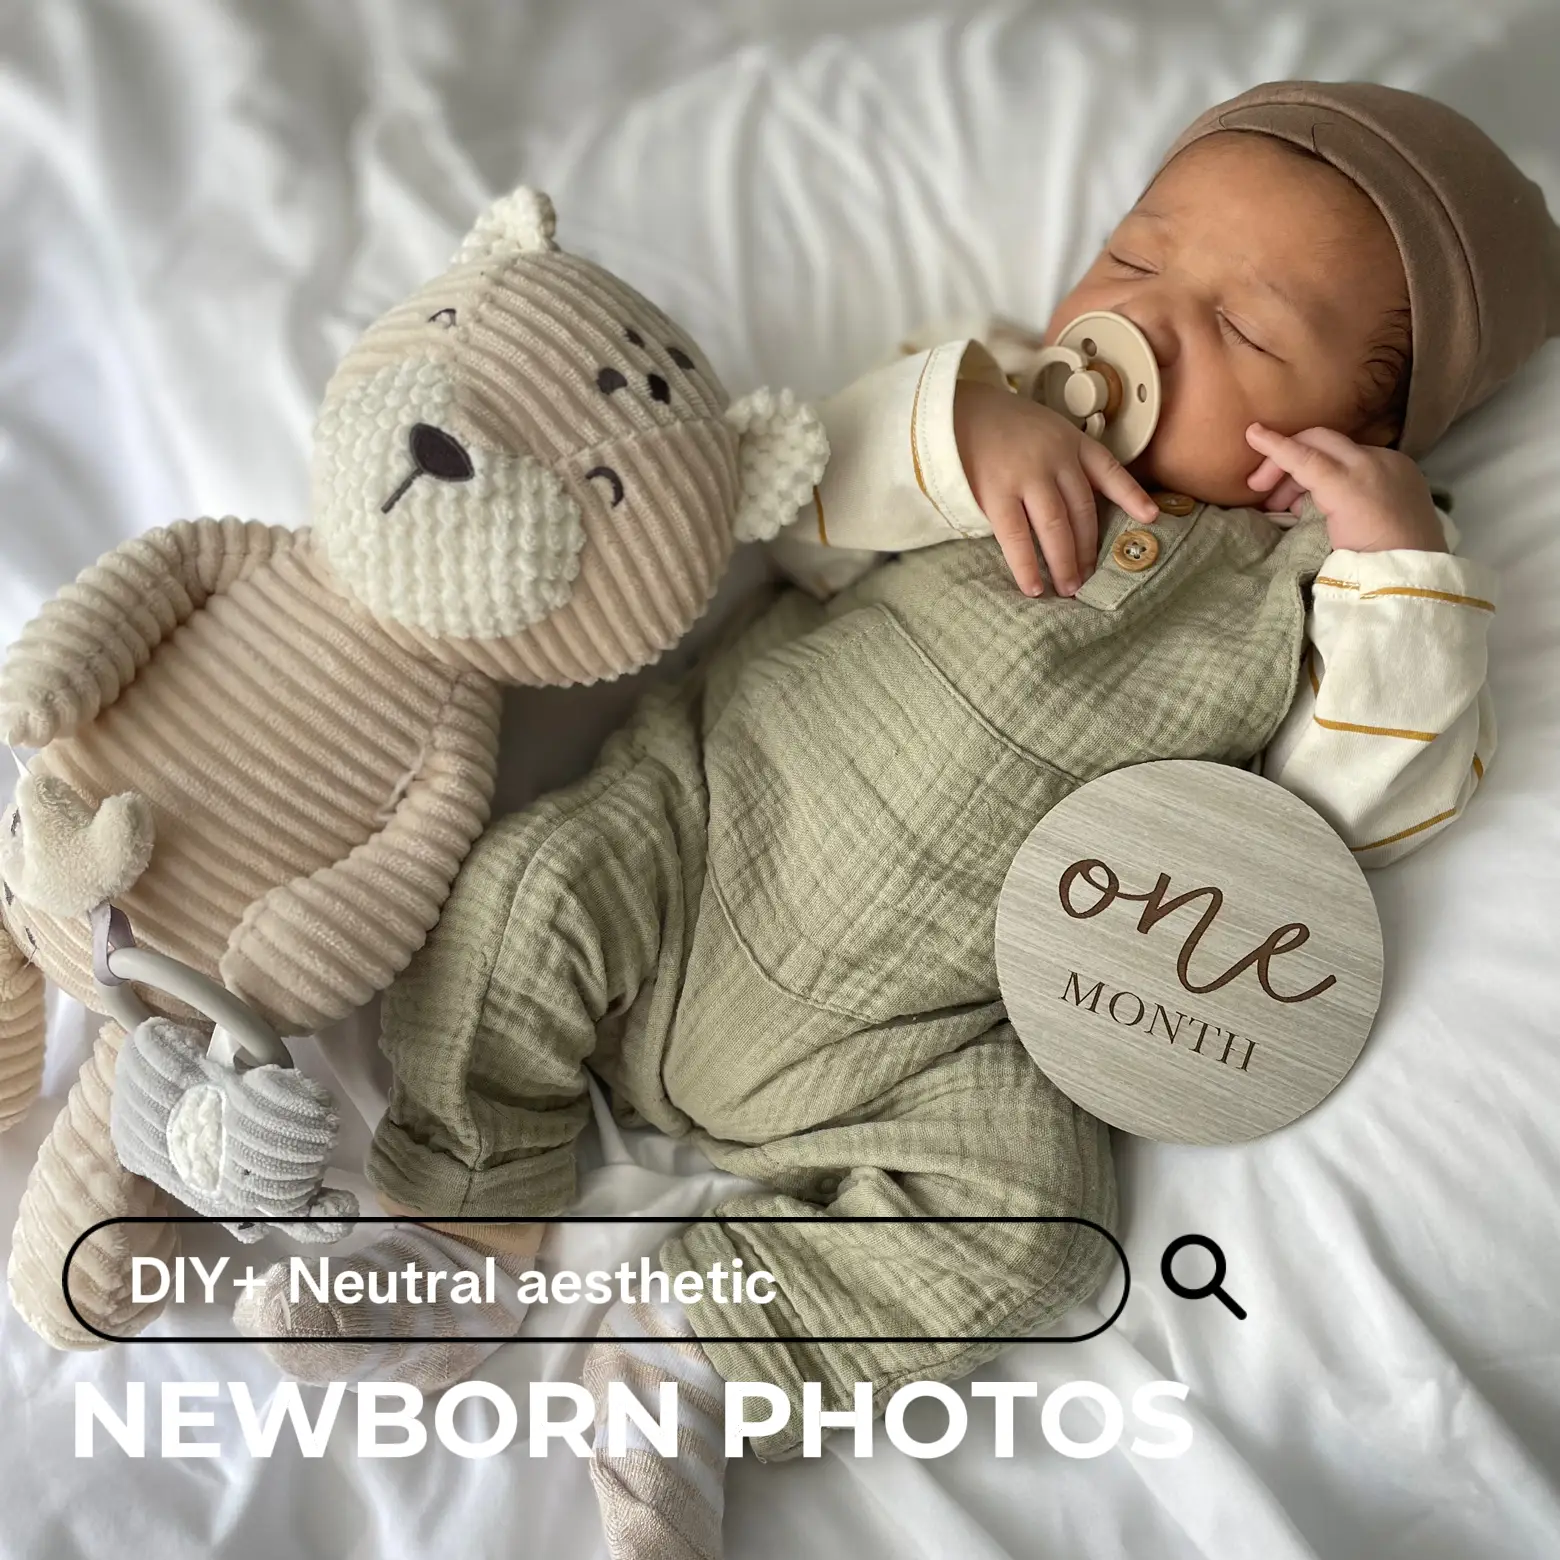 1 month baby photos: Neutral aesthetic